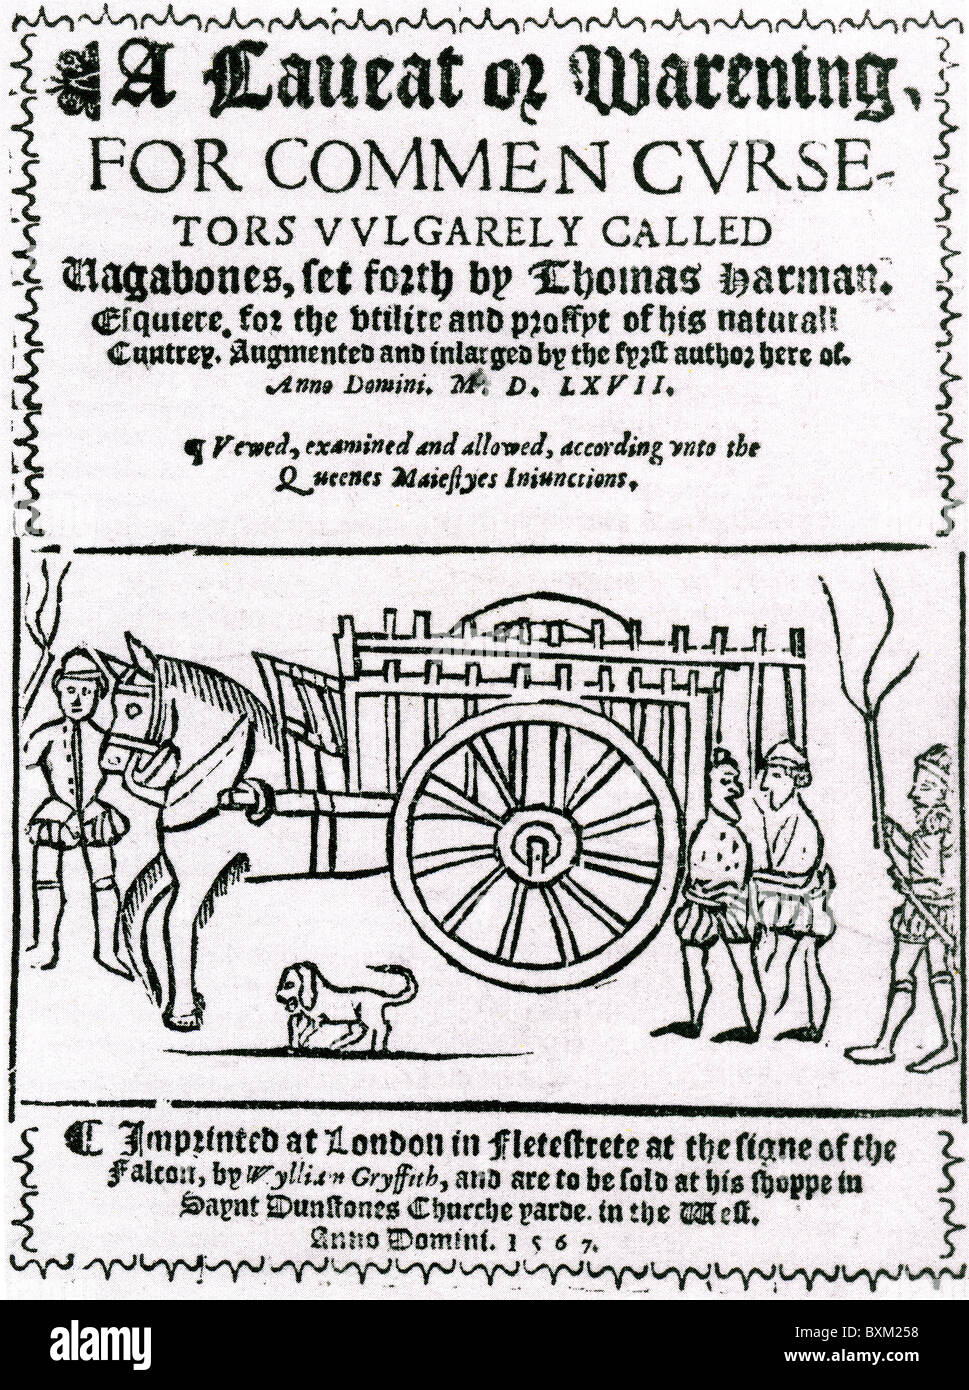 A CAVEAT or WARNING FOR COMMEN CURSITORS,VULGARLY CALLED VAGABONDS by Thomas Harman, 1568, showing their punishment Stock Photo